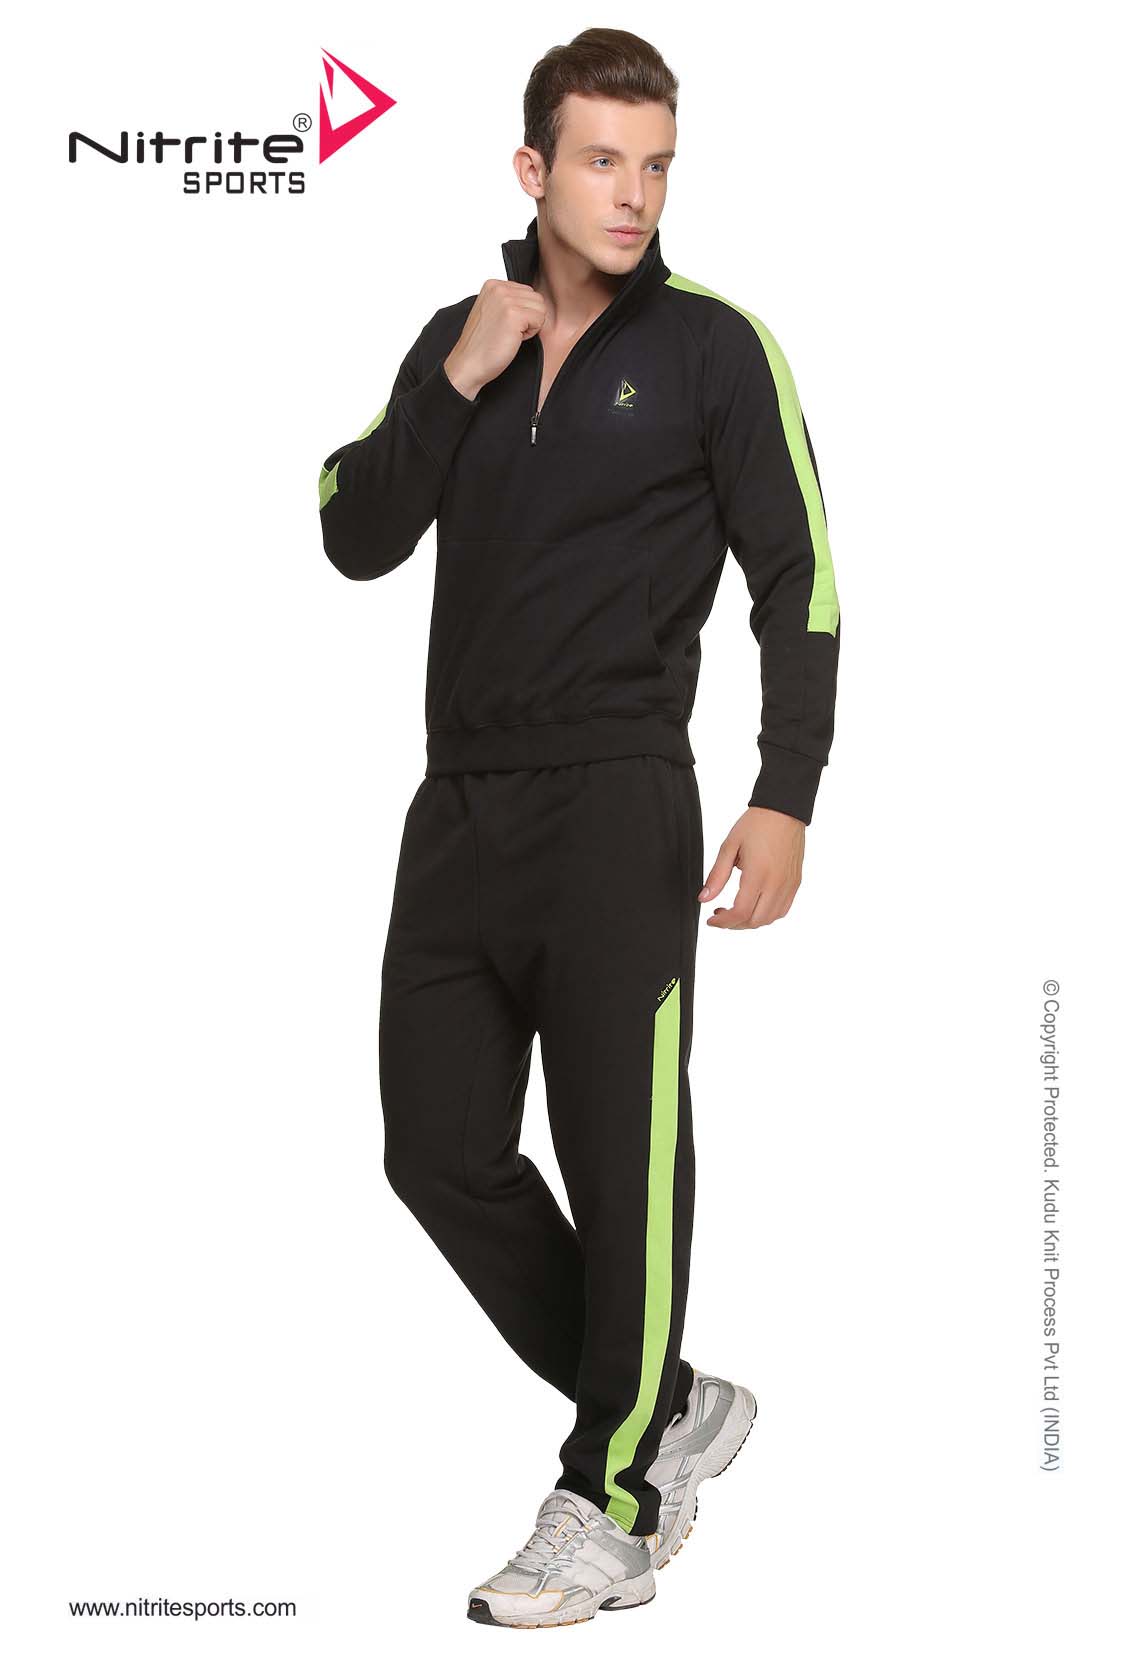 lime green tracksuit mens